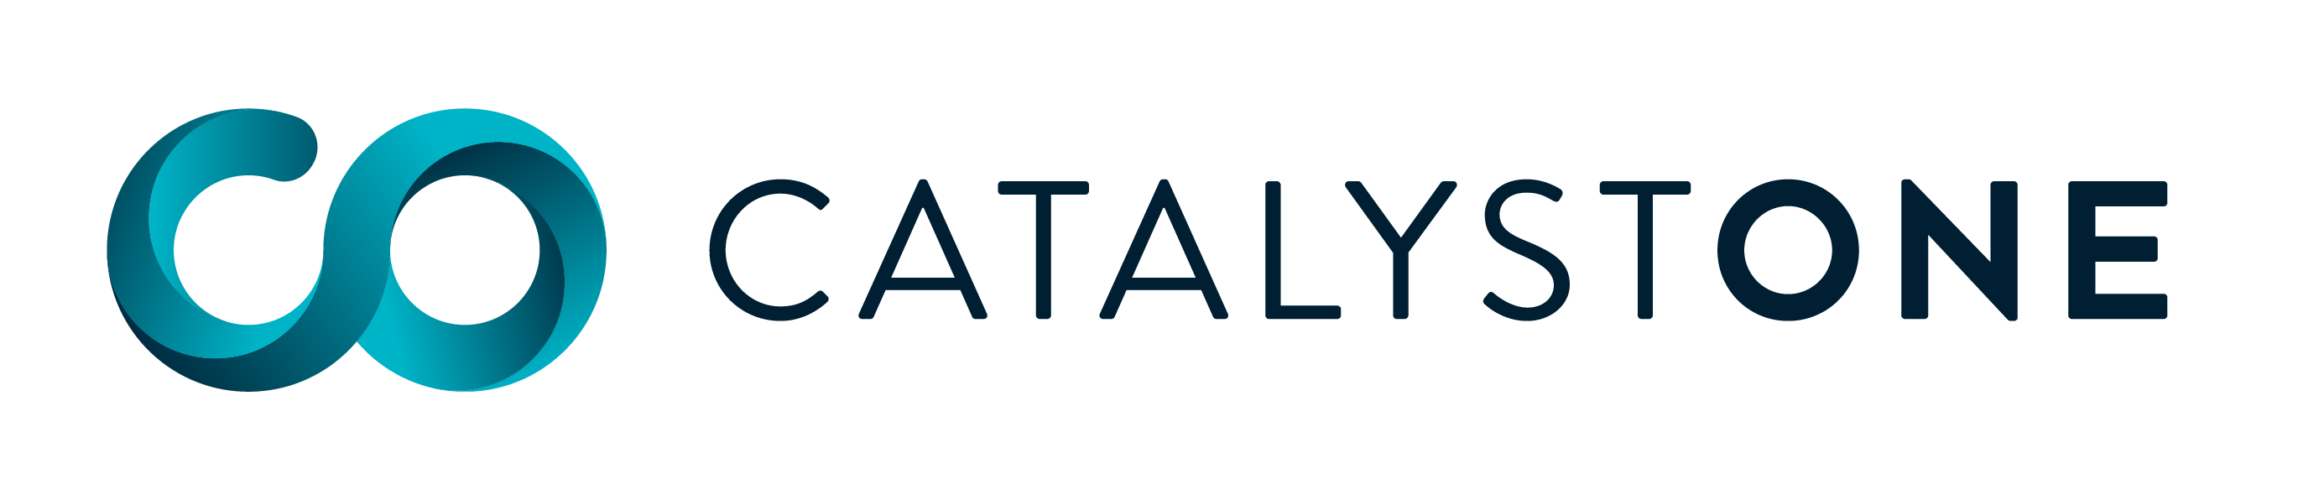 Catalyst One Logo 2019 Wide Colour